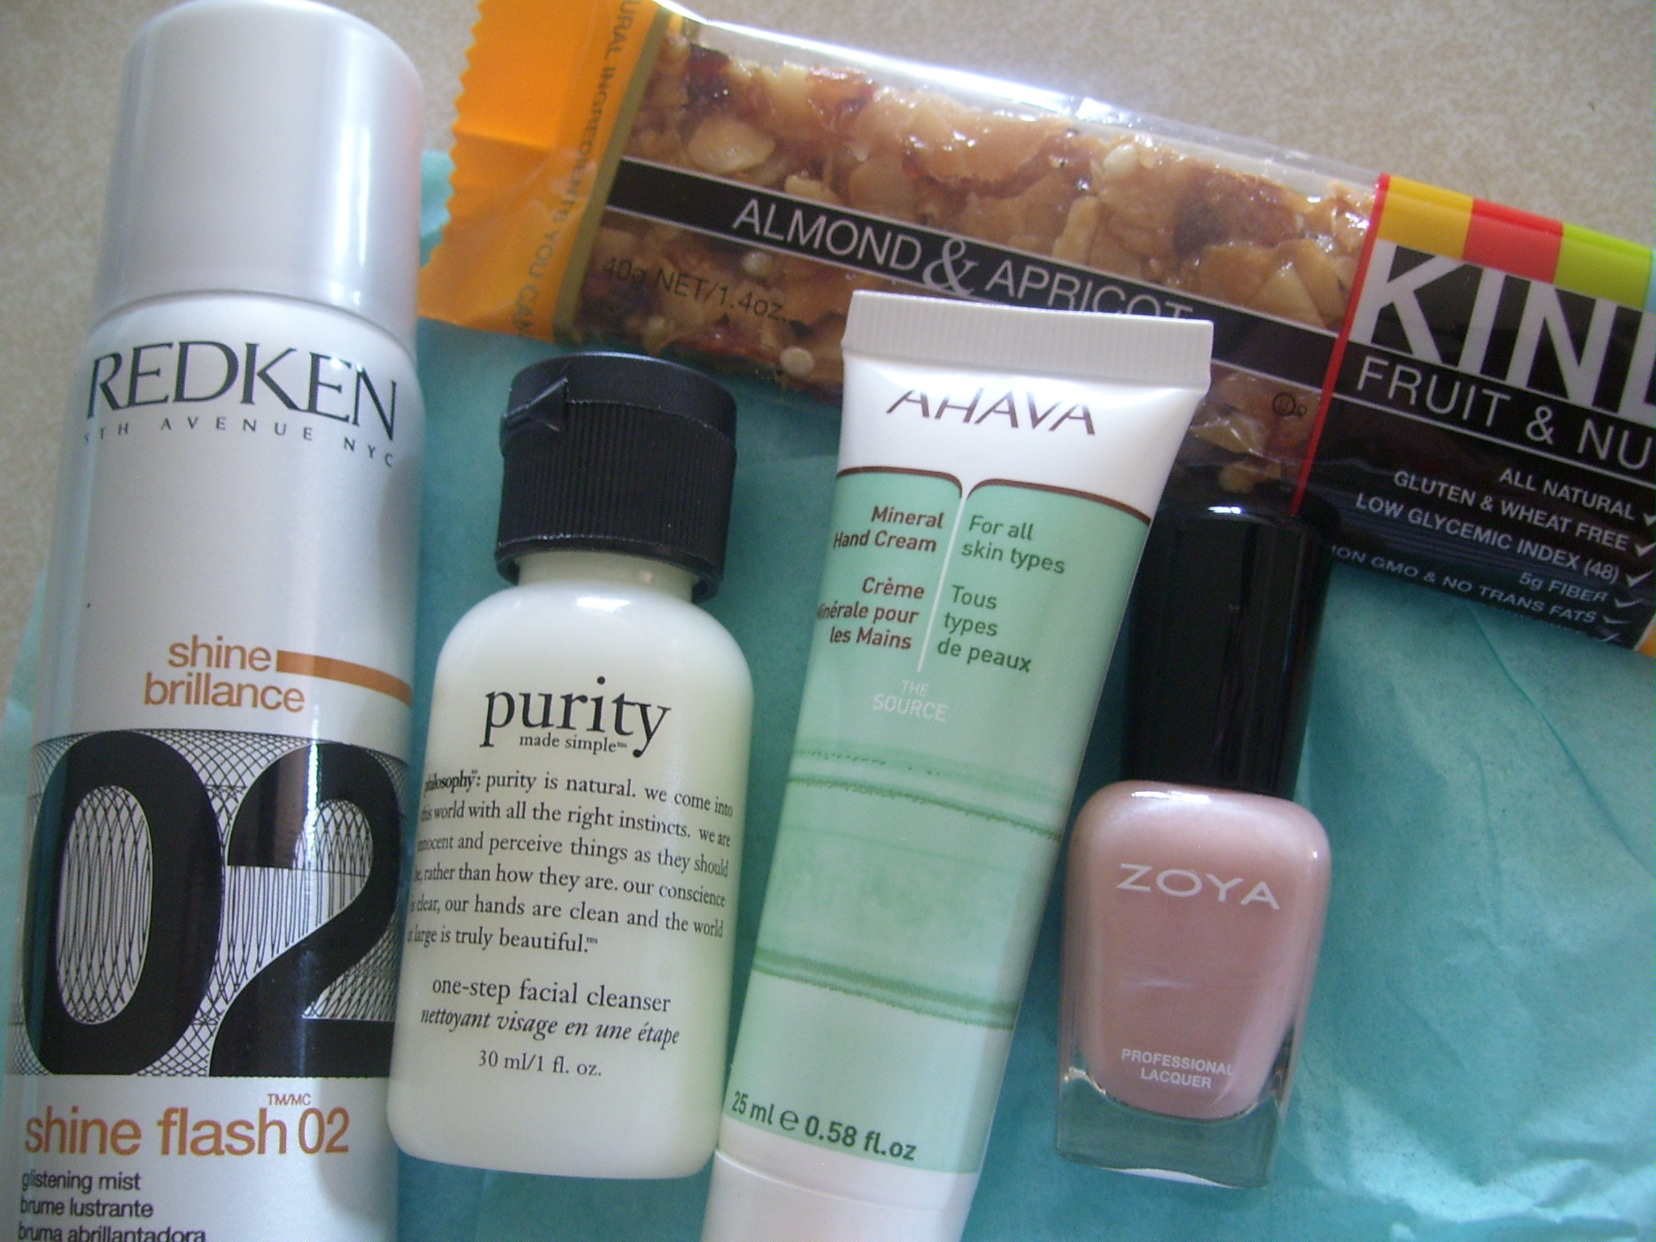 Final Thoughts on My July 2011 Birchbox Products